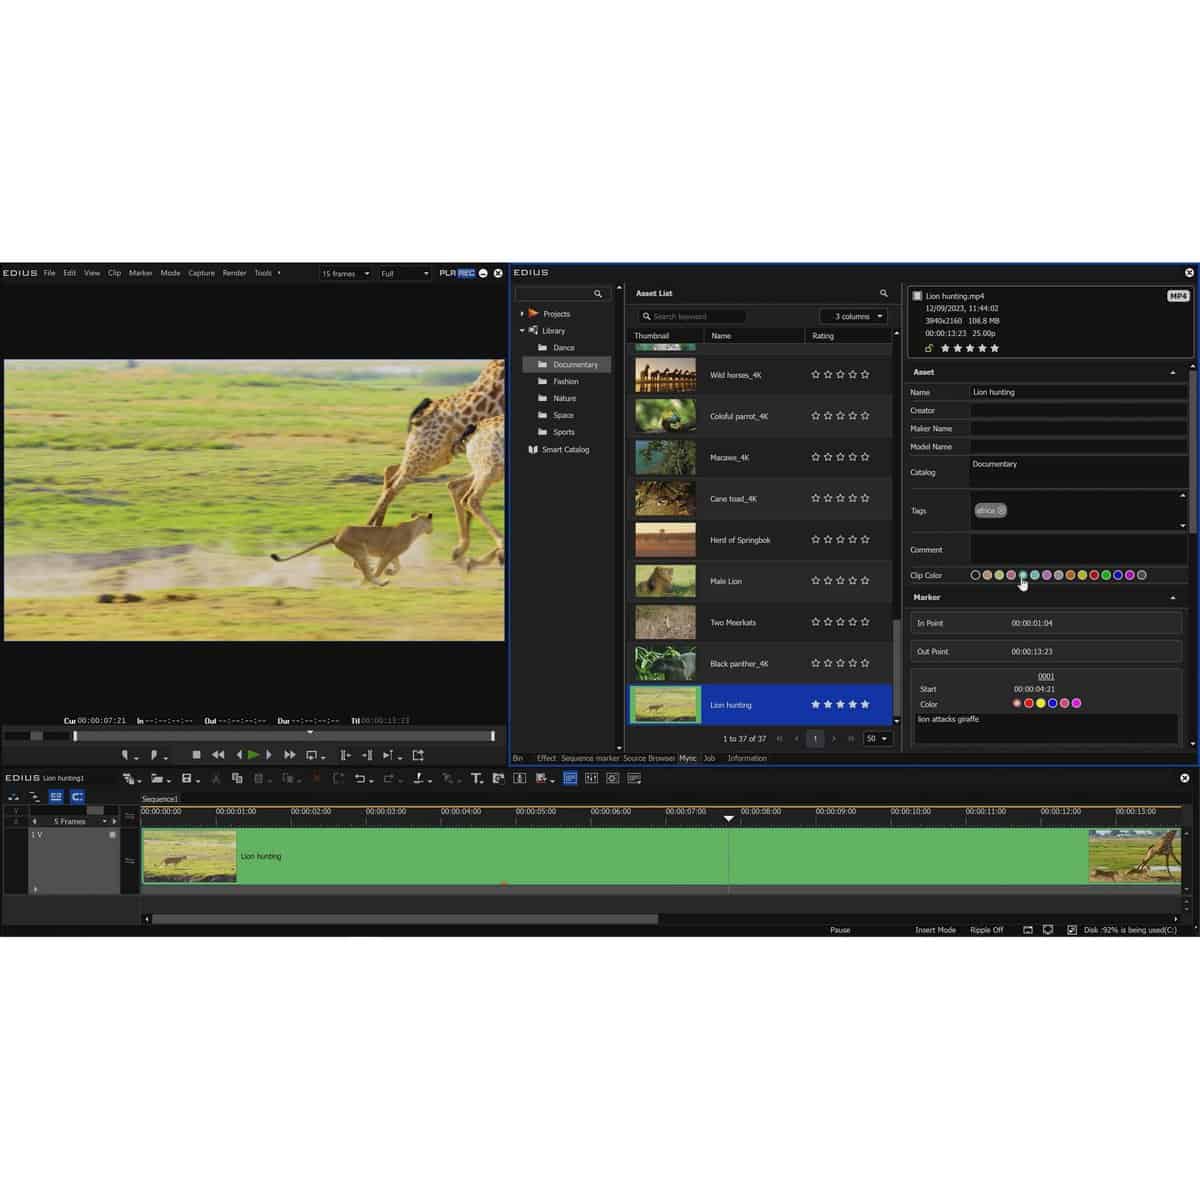 EDIUS 11 Pro Upgrade Second License Video Editing Software, Download Only